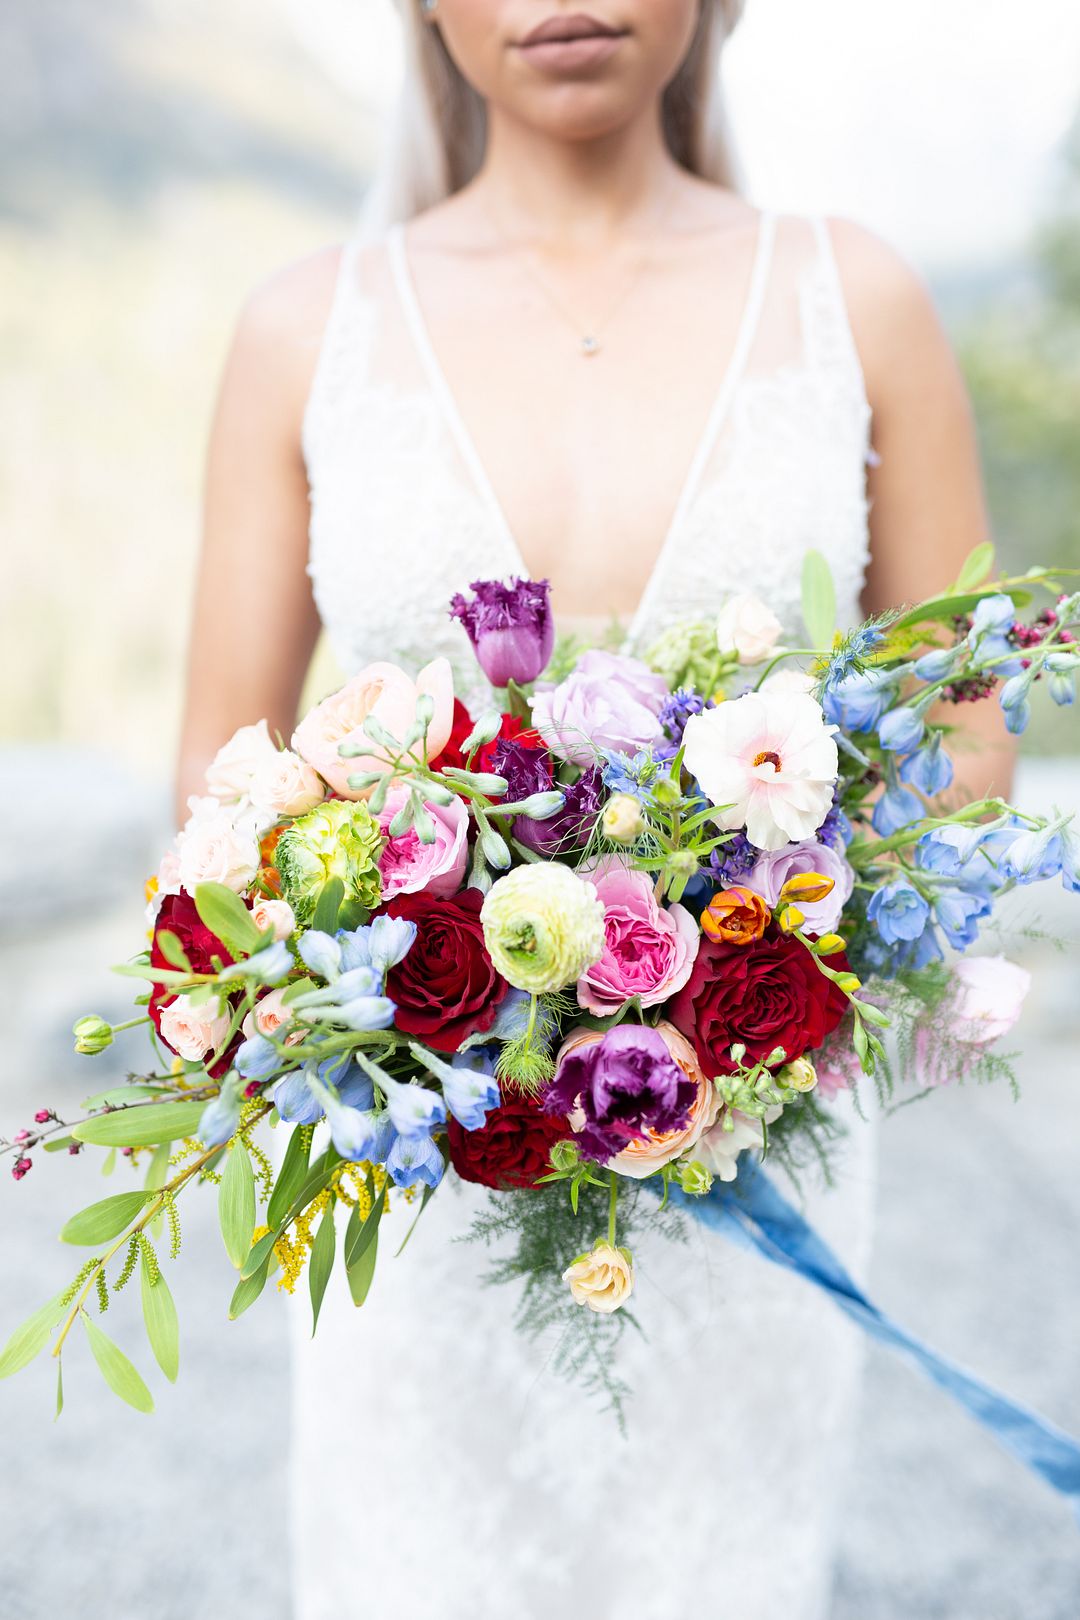 The wedding bouquet reflected the shoot theme   florals in all the different colors